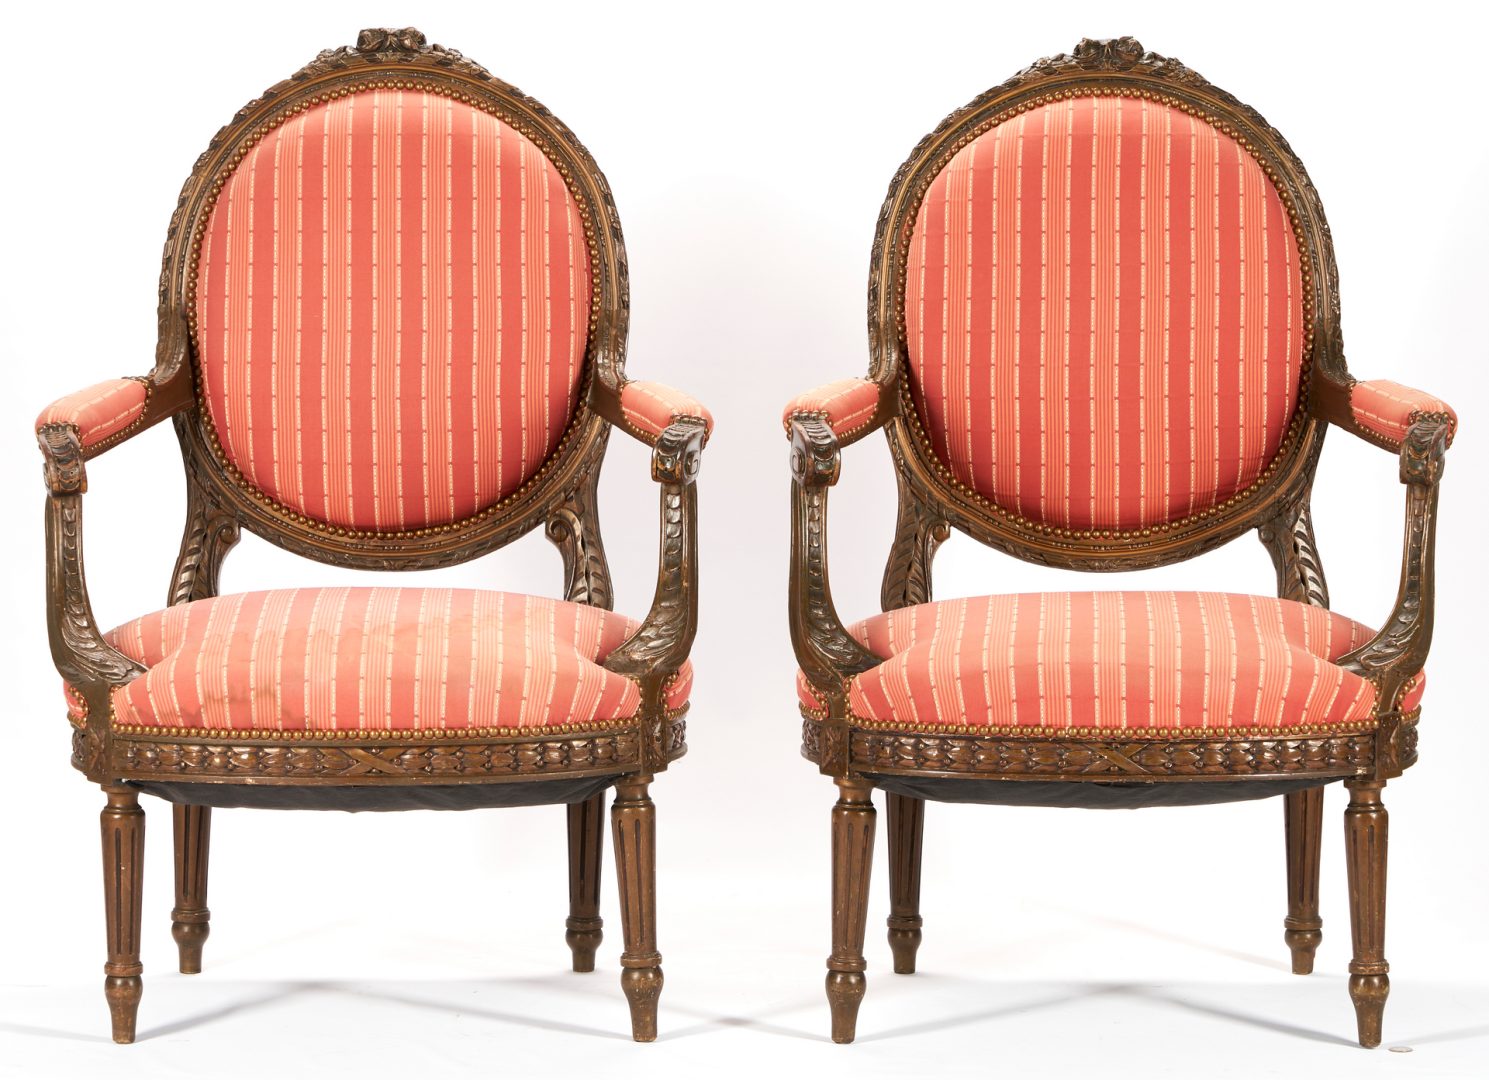 Lot 395: Pair of Louis XVI Style Carved Fauteuils Or Armchairs